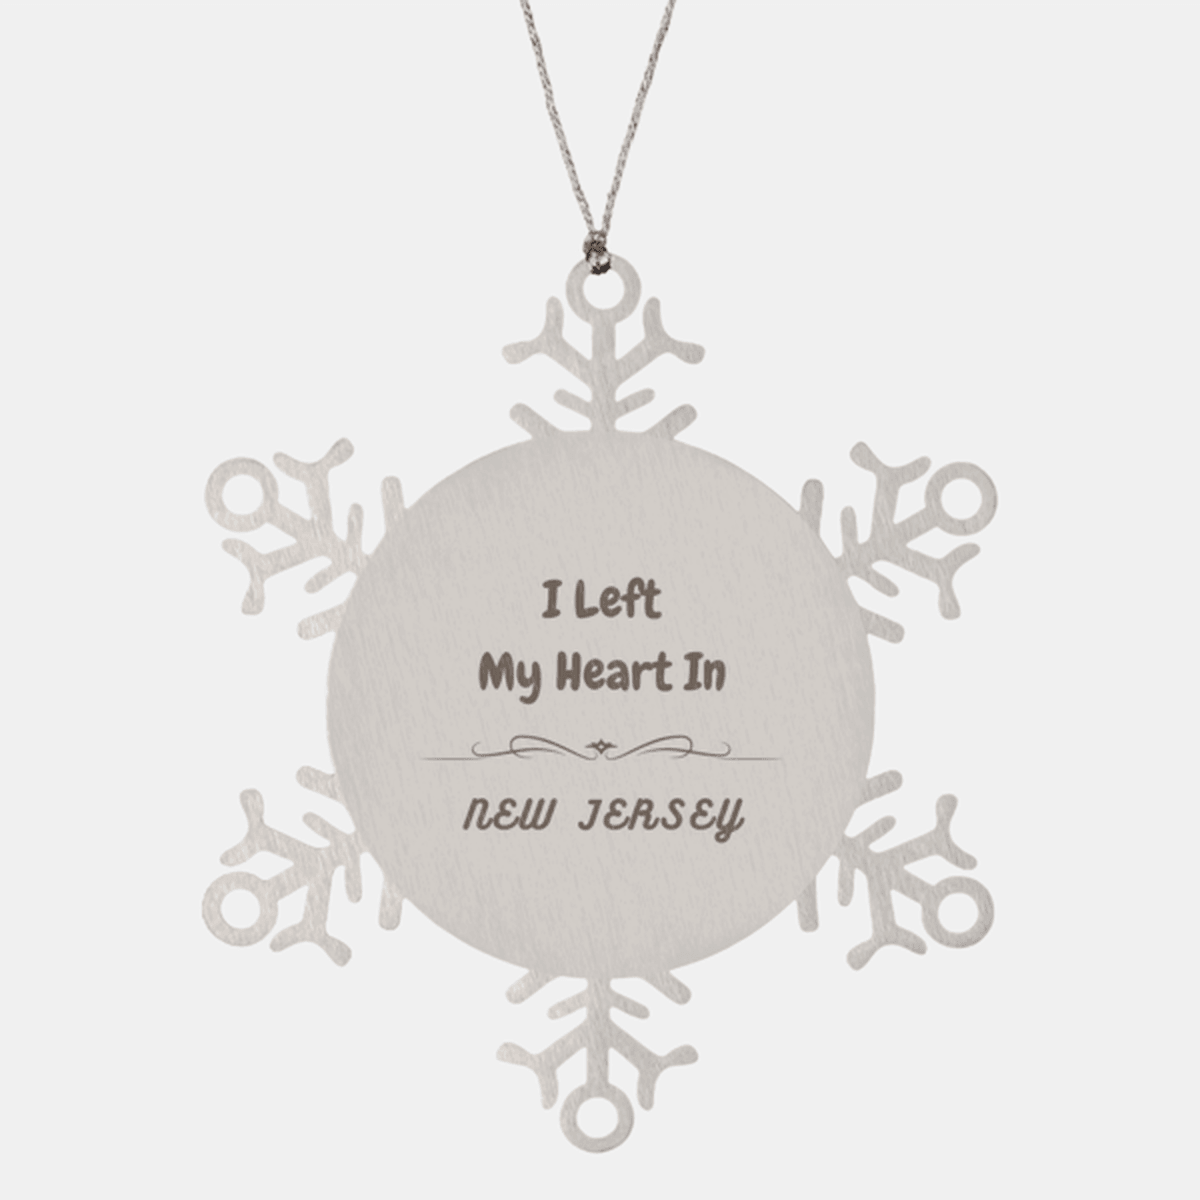 I Left My Heart In New Jersey Gifts, Meaningful New Jersey State for Friends, Men, Women. Snowflake Ornament for New Jersey People - Mallard Moon Gift Shop